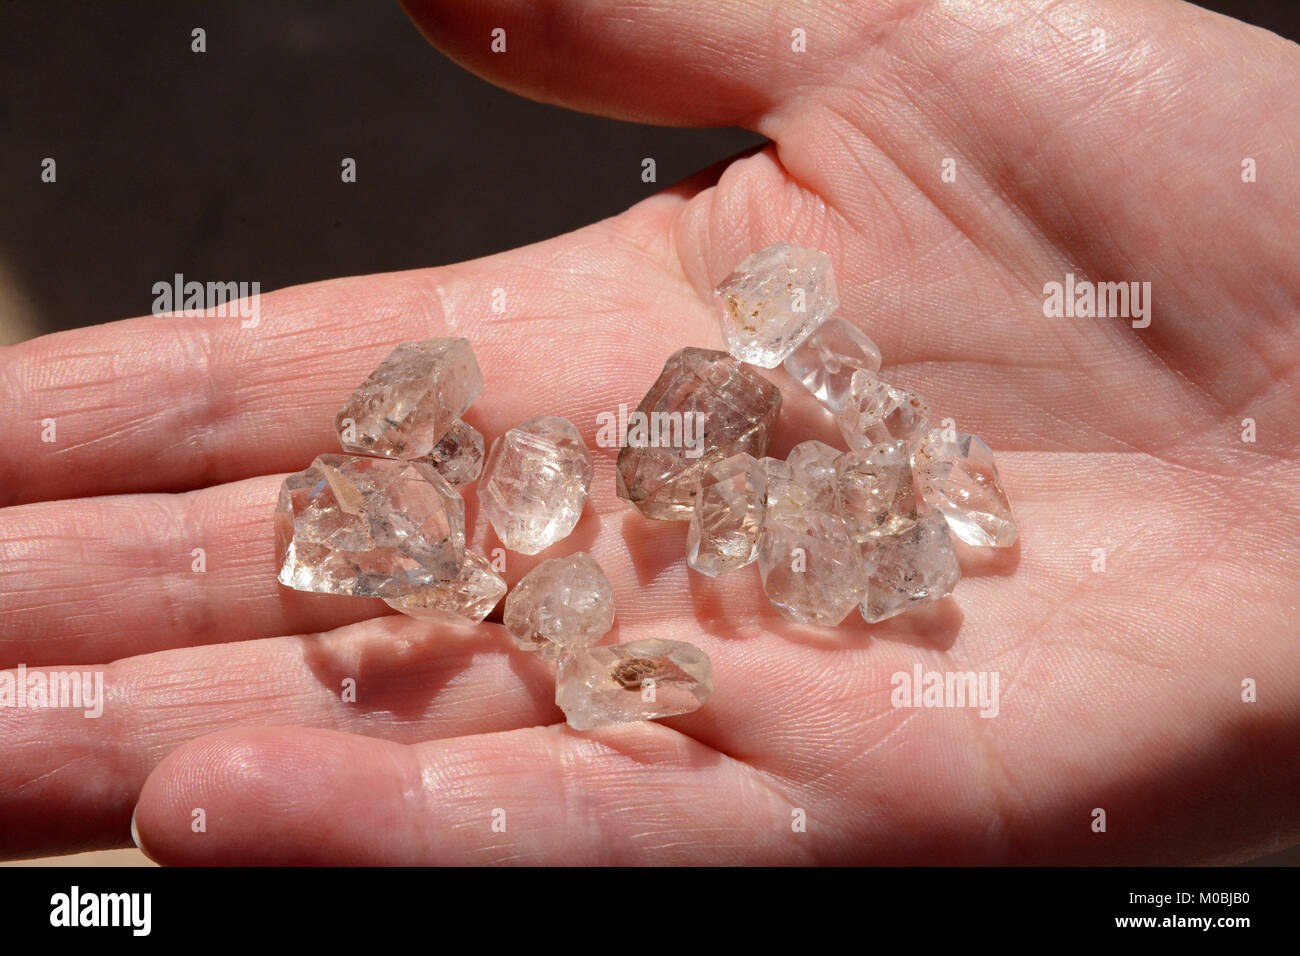 Hand holding numerous white clear quartz crystals Stock Photo